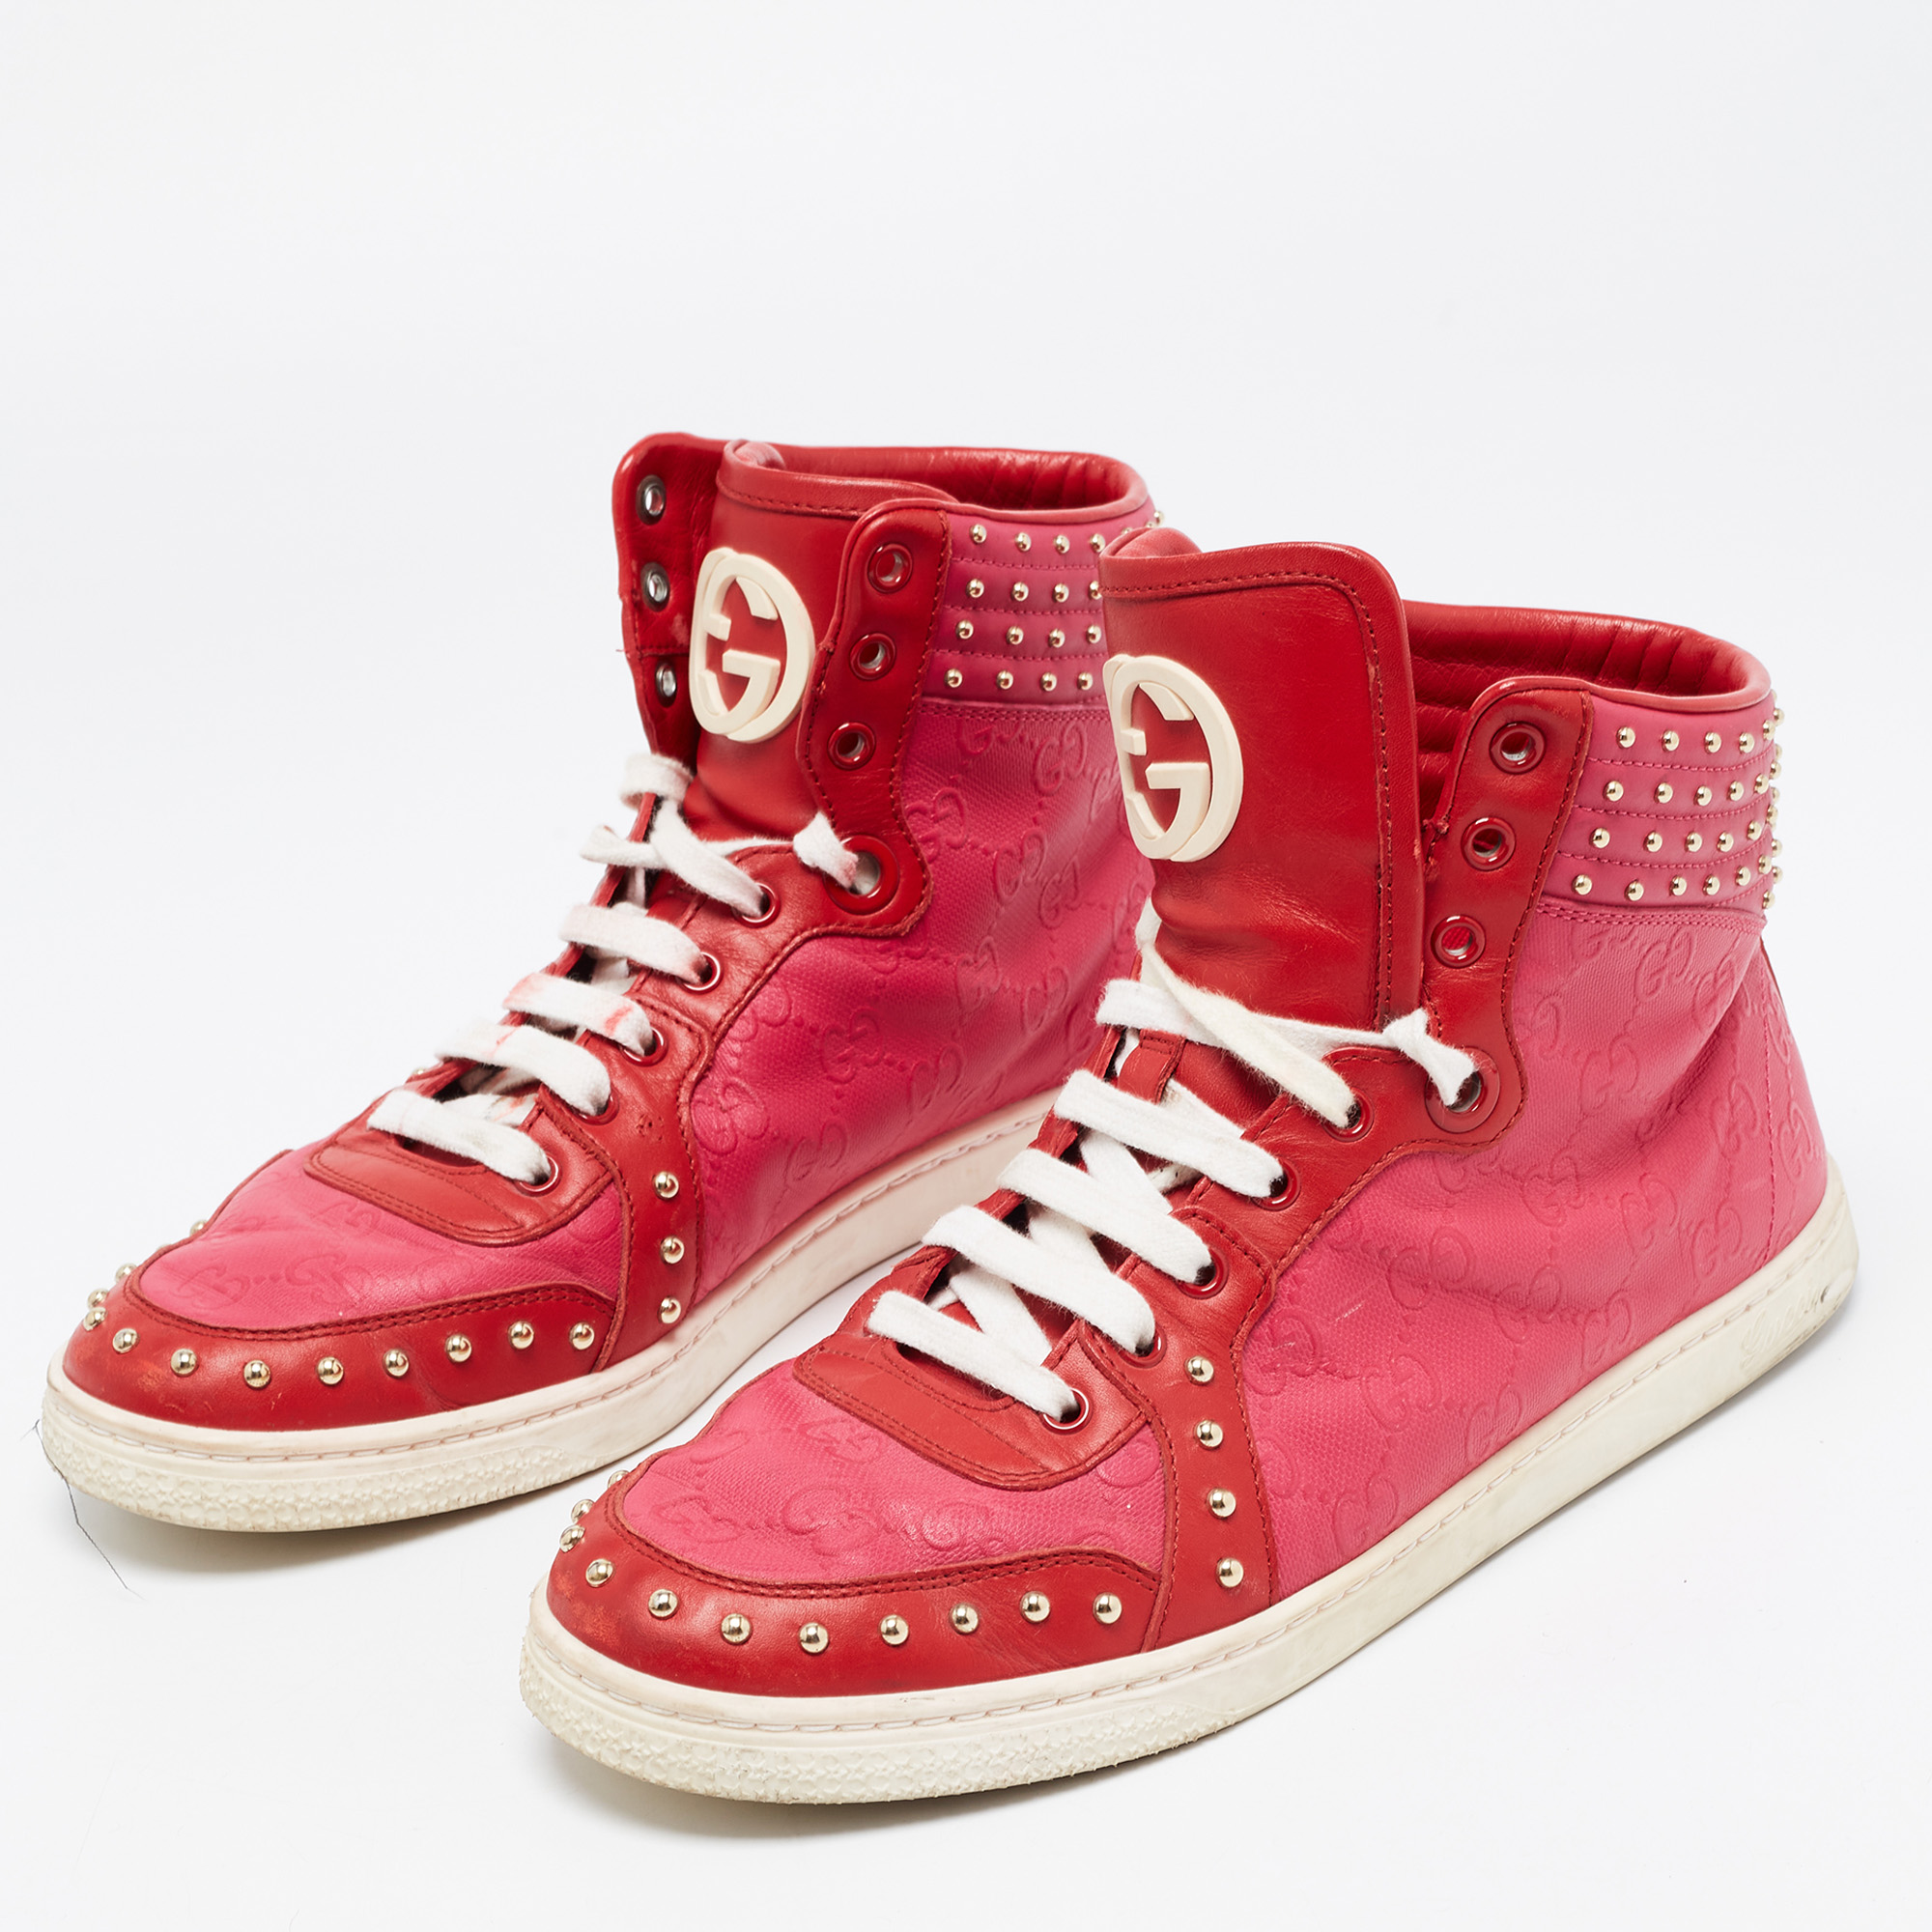 

Gucci Pink/Red Guccissima Leather Studded Coda High Top Sneakers Size